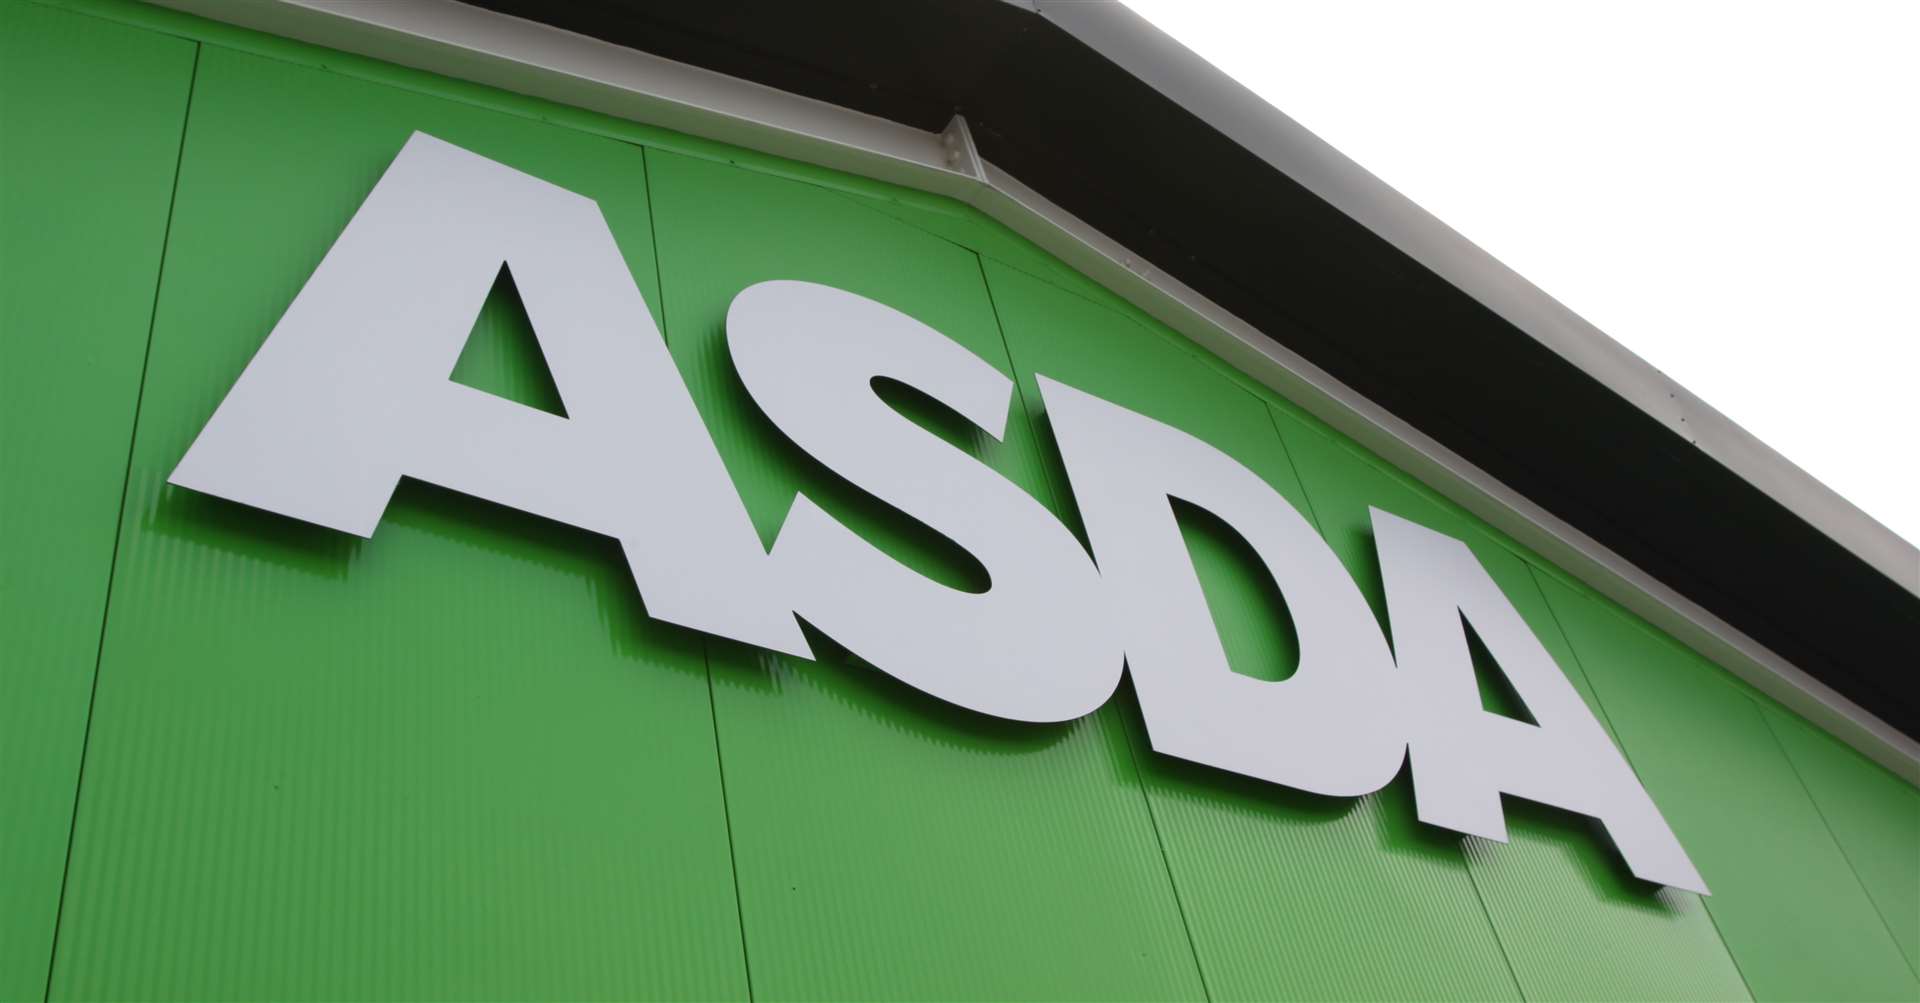 Asda is changing its opening hours for Easter